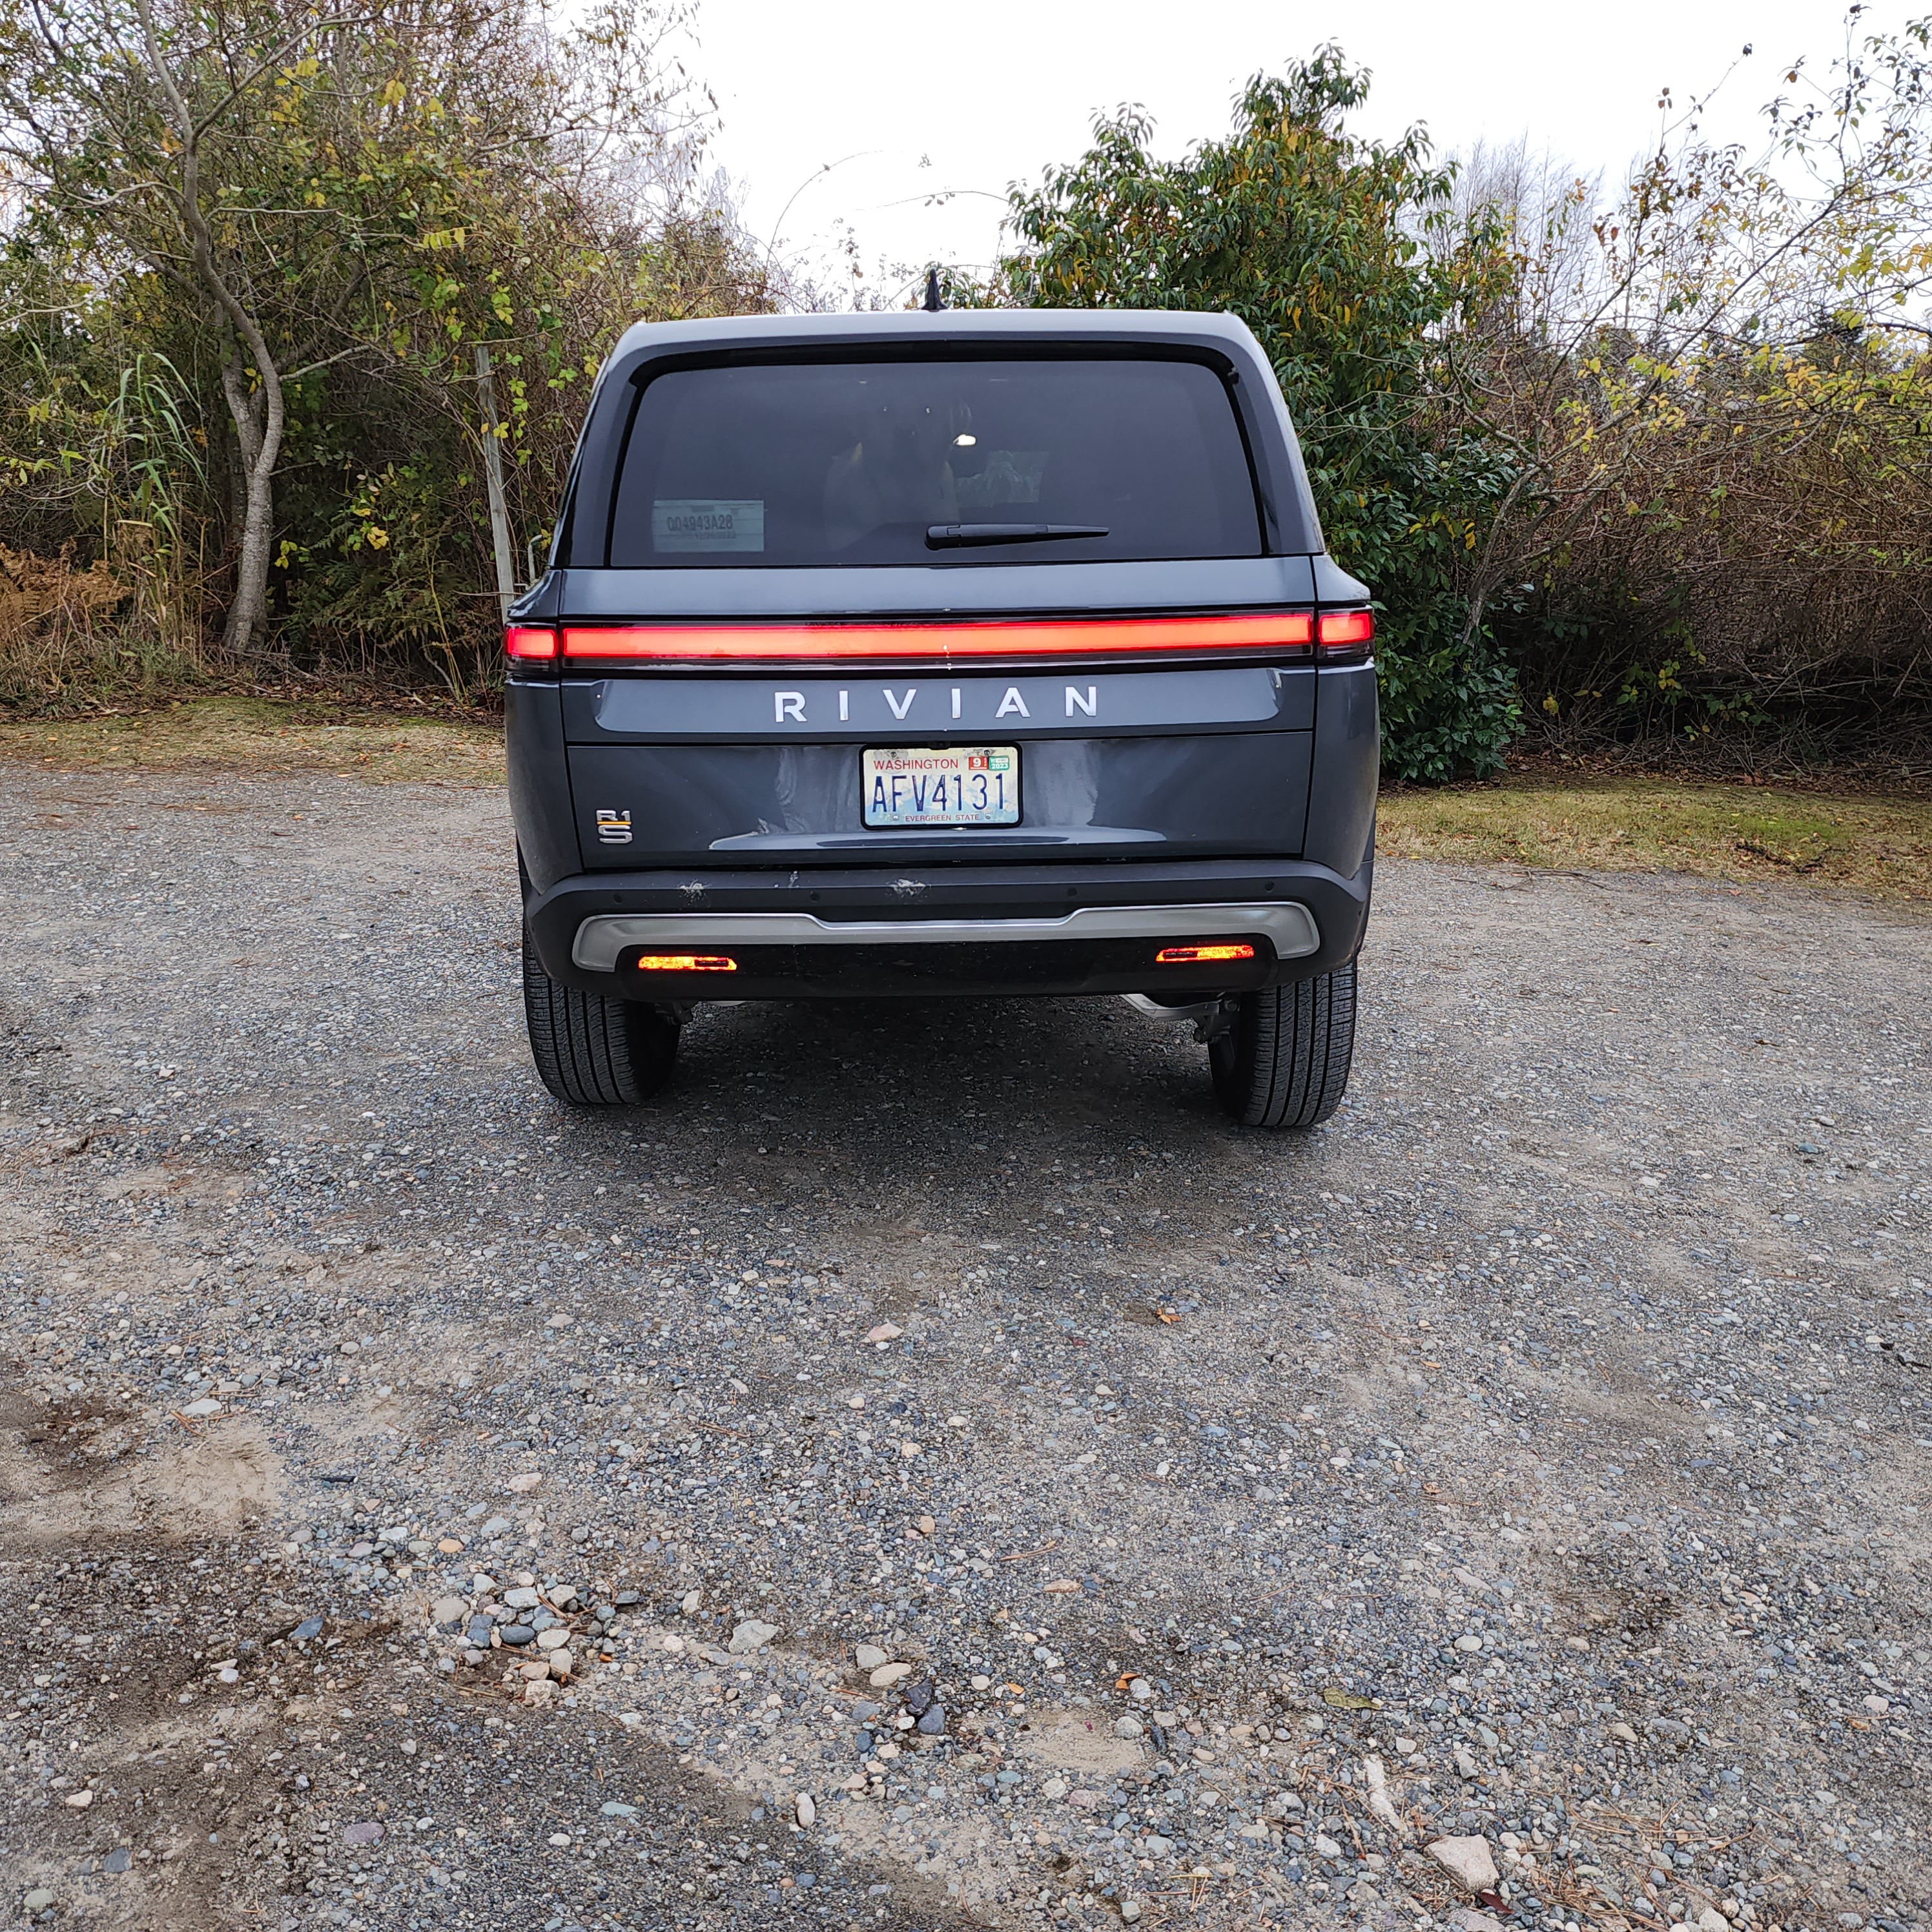 Rivian R1T R1S Camp Mode + Pet Comfort Mode For the Win! 20221111_145209